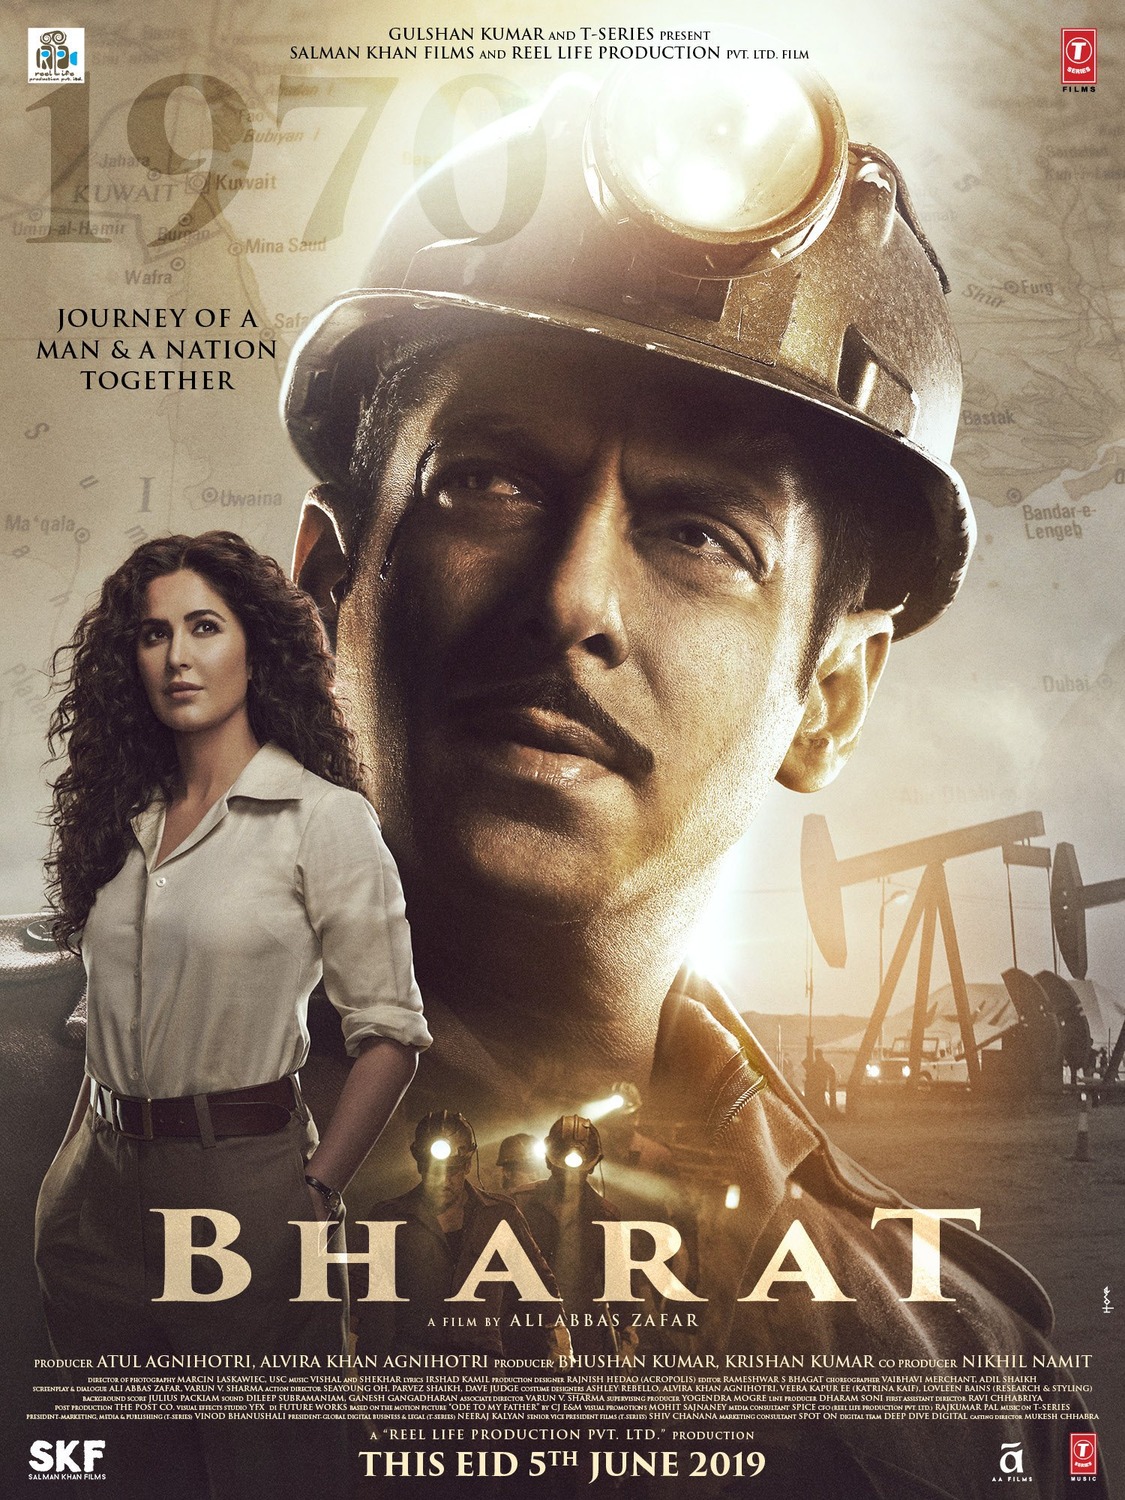 Extra Large Movie Poster Image for Bharat 